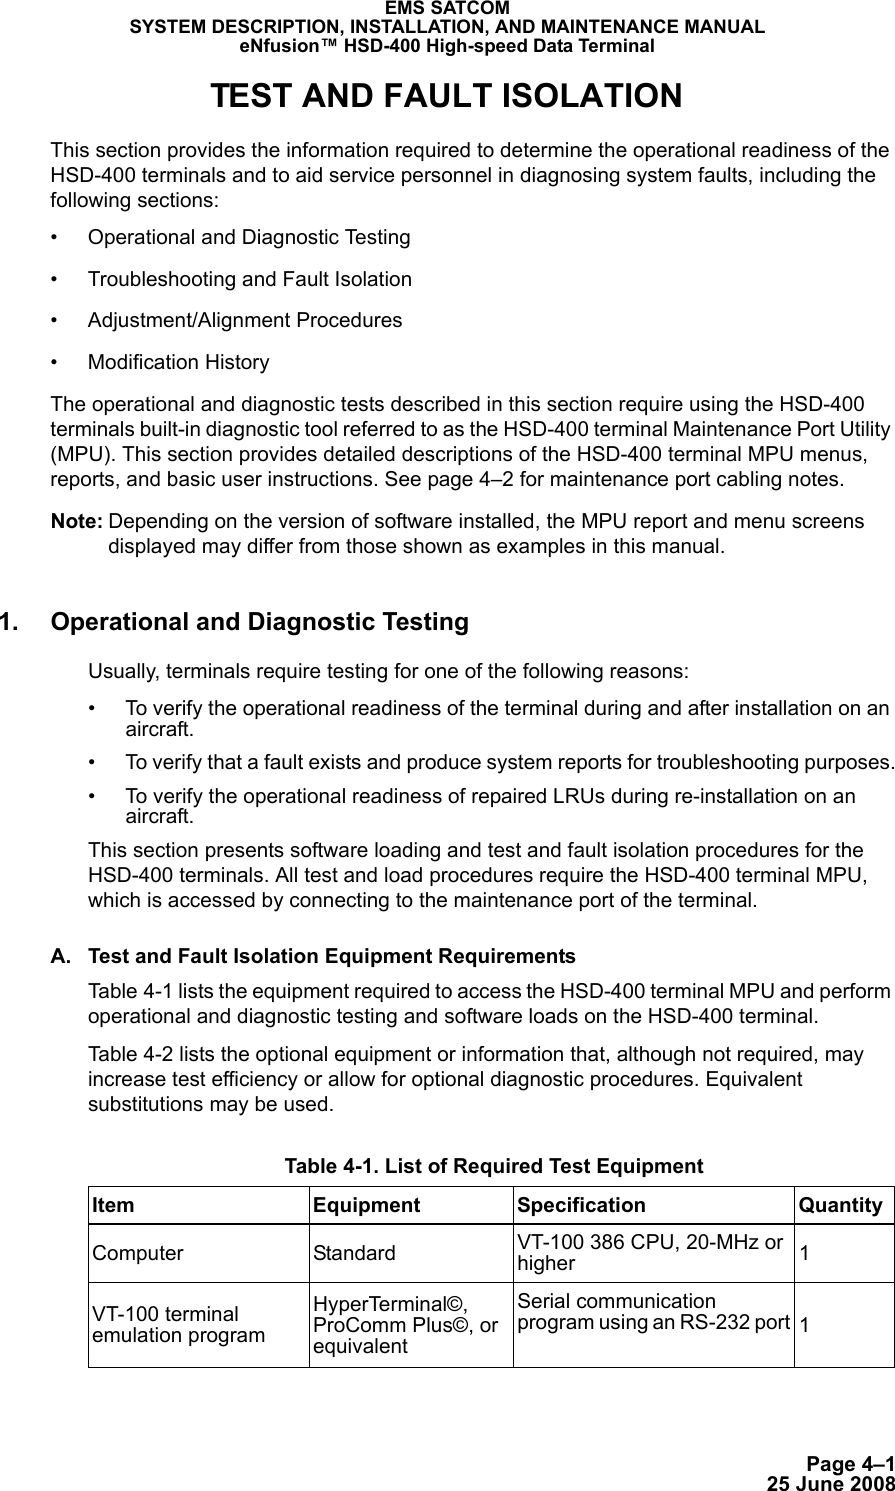 Page 4–125 June 2008EMS SATCOMSYSTEM DESCRIPTION, INSTALLATION, AND MAINTENANCE MANUALeNfusion™ HSD-400 High-speed Data TerminalTEST AND FAULT ISOLATIONThis section provides the information required to determine the operational readiness of the HSD-400 terminals and to aid service personnel in diagnosing system faults, including the following sections:• Operational and Diagnostic Testing• Troubleshooting and Fault Isolation• Adjustment/Alignment Procedures• Modification HistoryThe operational and diagnostic tests described in this section require using the HSD-400 terminals built-in diagnostic tool referred to as the HSD-400 terminal Maintenance Port Utility (MPU). This section provides detailed descriptions of the HSD-400 terminal MPU menus, reports, and basic user instructions. See page 4–2 for maintenance port cabling notes.Note: Depending on the version of software installed, the MPU report and menu screens displayed may differ from those shown as examples in this manual.1. Operational and Diagnostic Testing Usually, terminals require testing for one of the following reasons:• To verify the operational readiness of the terminal during and after installation on an aircraft.• To verify that a fault exists and produce system reports for troubleshooting purposes.• To verify the operational readiness of repaired LRUs during re-installation on an aircraft.This section presents software loading and test and fault isolation procedures for the HSD-400 terminals. All test and load procedures require the HSD-400 terminal MPU, which is accessed by connecting to the maintenance port of the terminal. A. Test and Fault Isolation Equipment RequirementsTable 4-1 lists the equipment required to access the HSD-400 terminal MPU and perform operational and diagnostic testing and software loads on the HSD-400 terminal. Table 4-2 lists the optional equipment or information that, although not required, may increase test efficiency or allow for optional diagnostic procedures. Equivalent substitutions may be used. Table 4-1. List of Required Test EquipmentItem Equipment Specification QuantityComputer Standard VT-100 386 CPU, 20-MHz or higher 1VT-100 terminal emulation programHyperTerminal©, ProComm Plus©, or equivalentSerial communication program using an RS-232 port 1